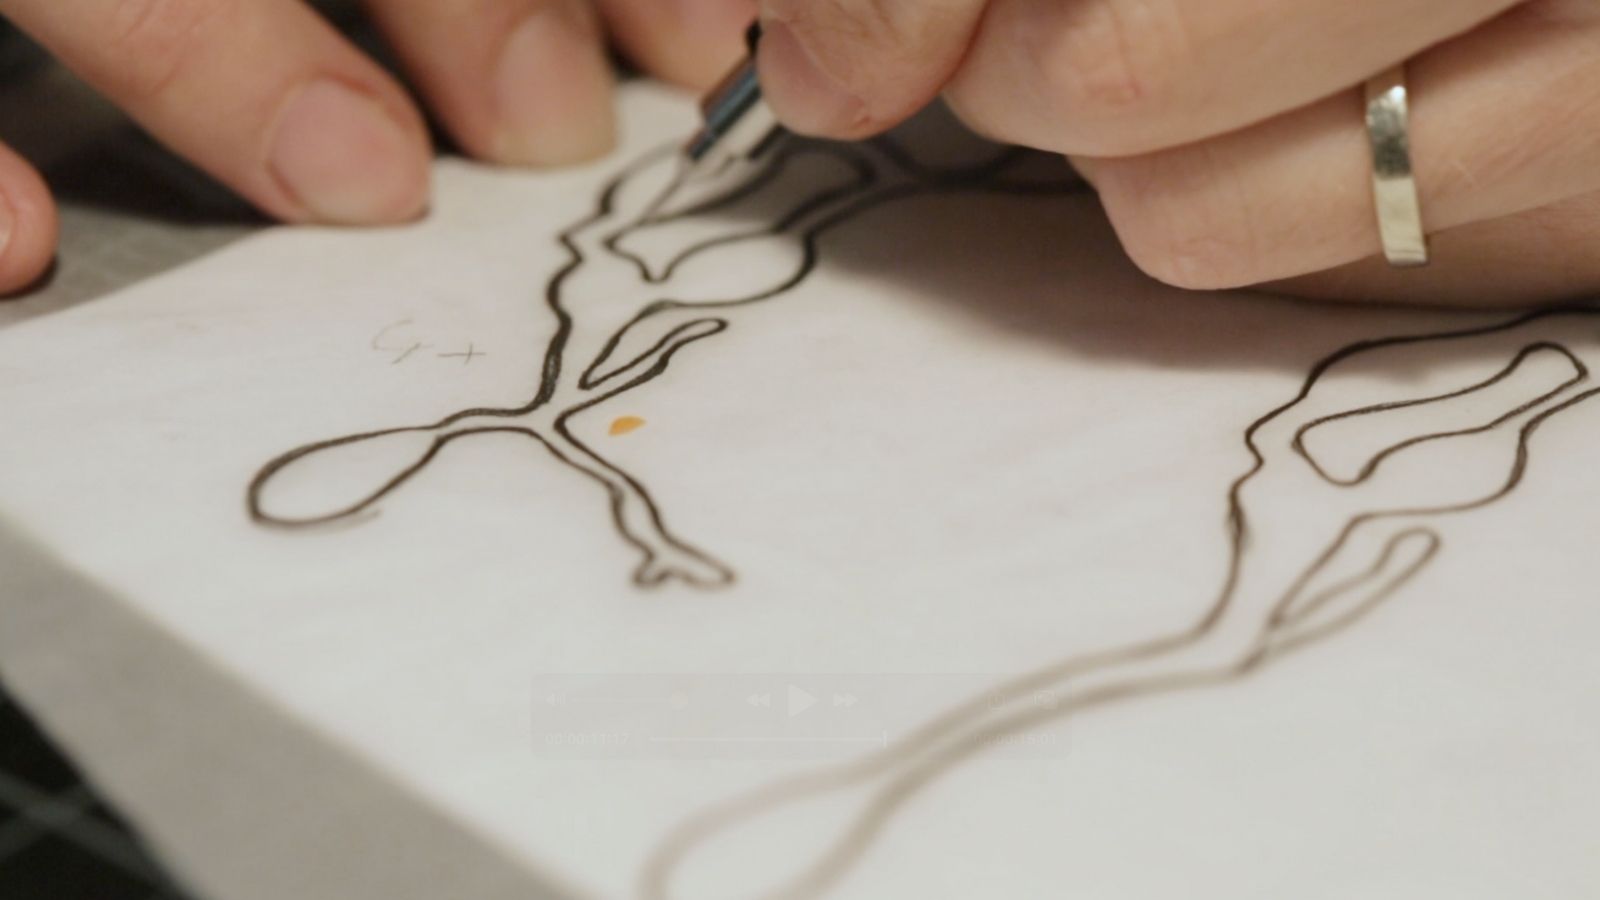 Denisa Piatti is sketching a design for a piece from her Seaweed Collection